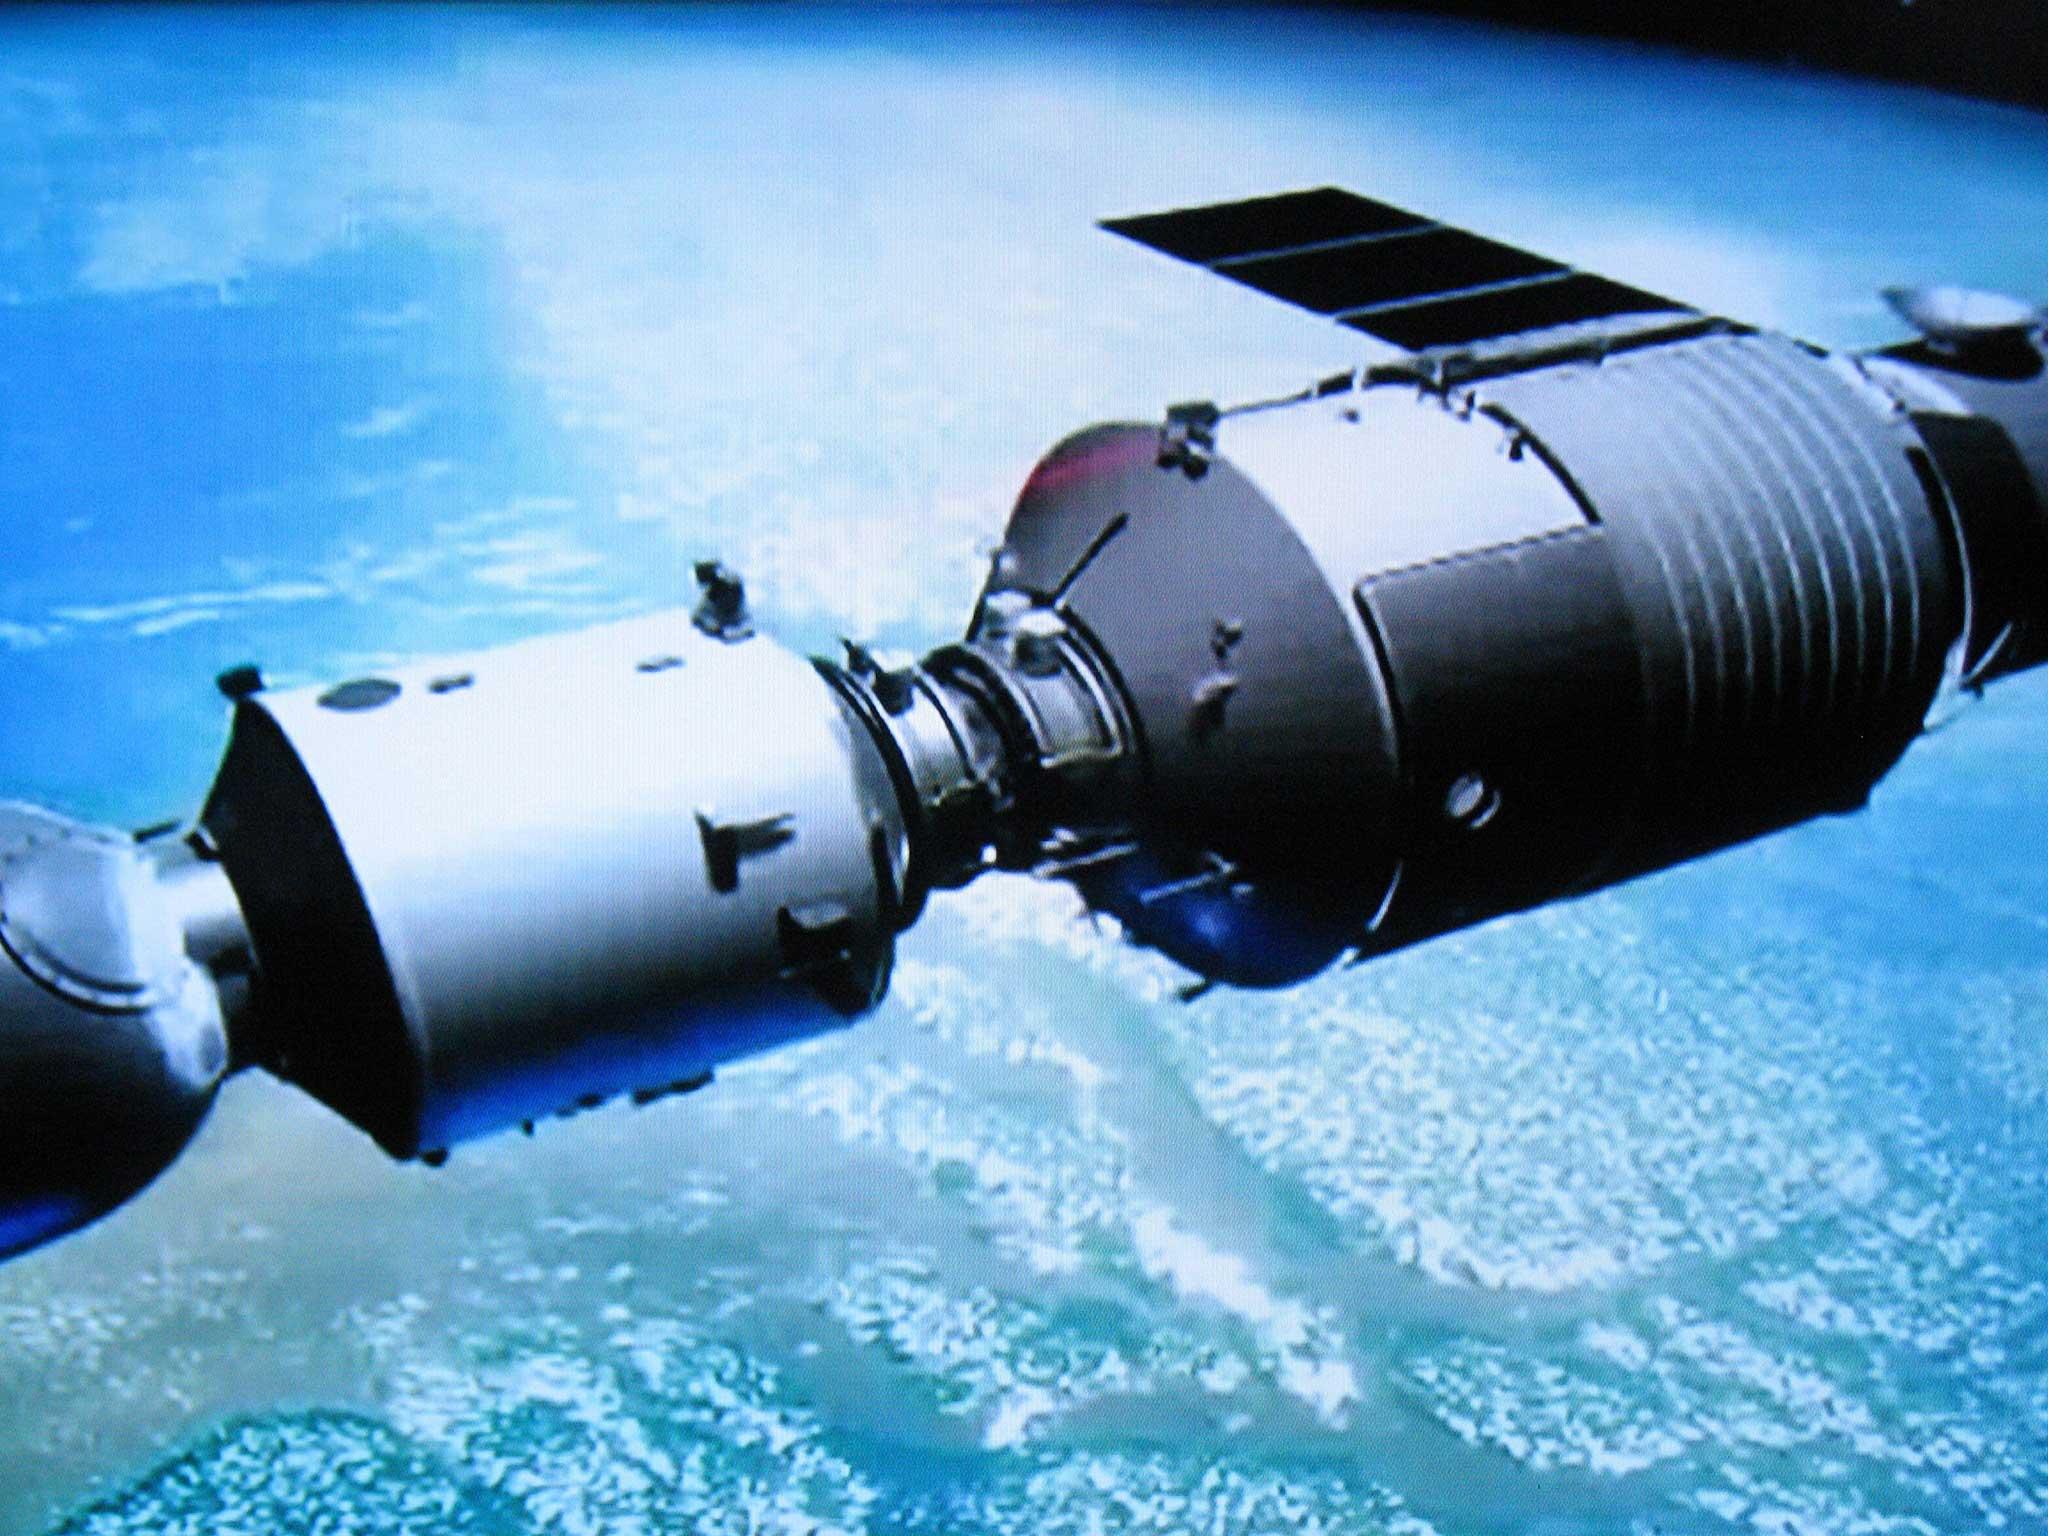 Tiangong Chinese Space Station Could Emit Highly Toxic Vapours